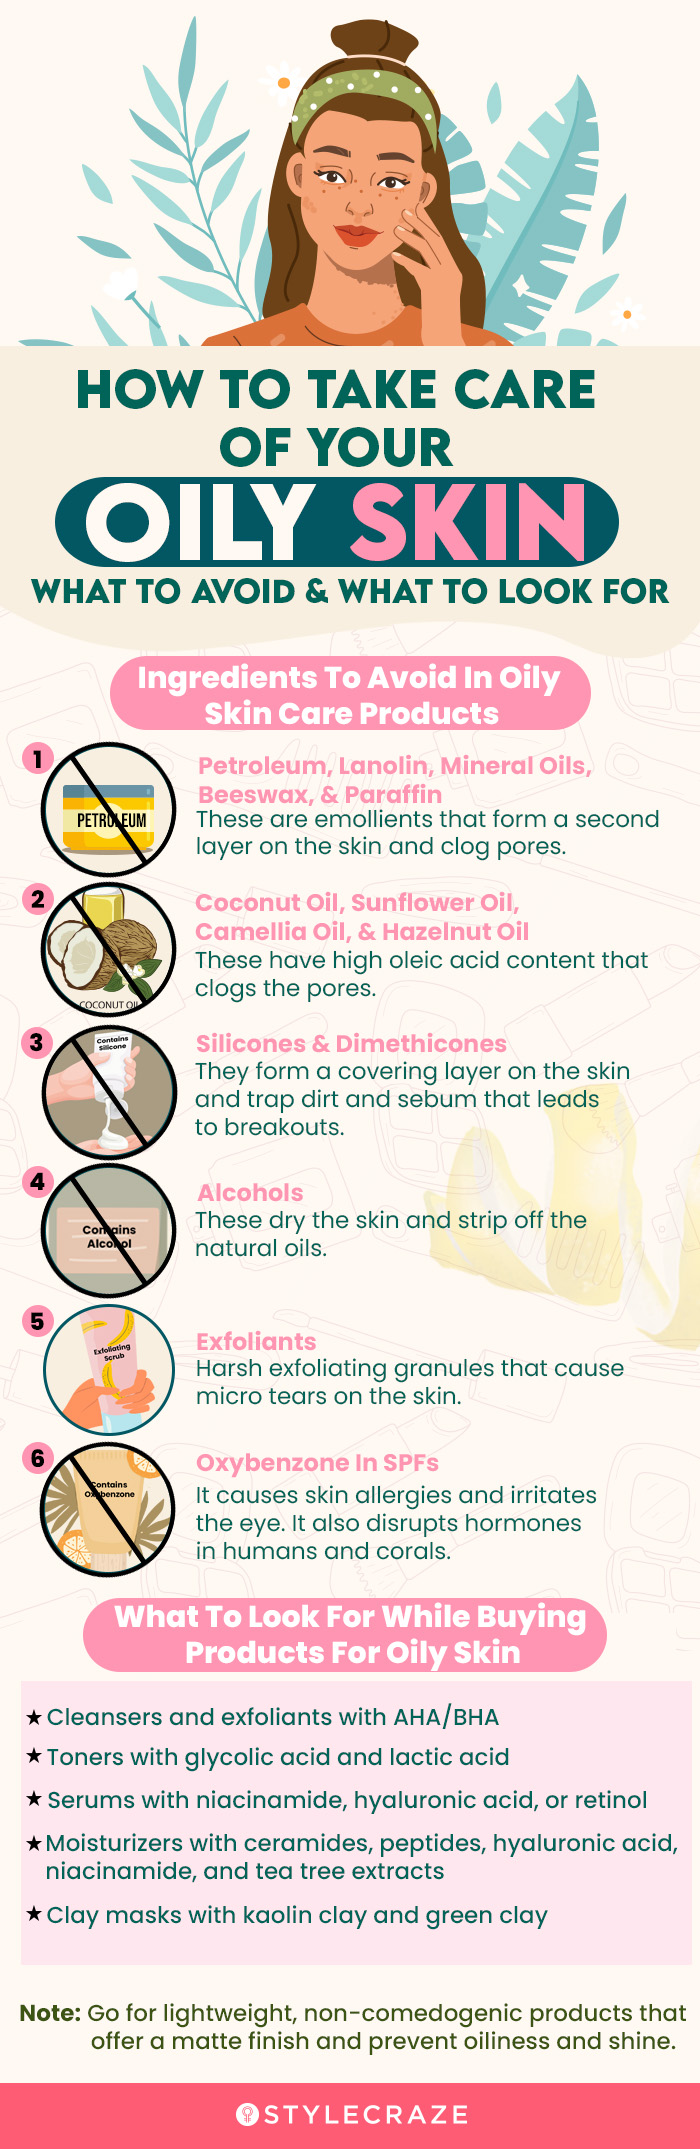 How To Take Care Of Your Oily Skin [infographic]